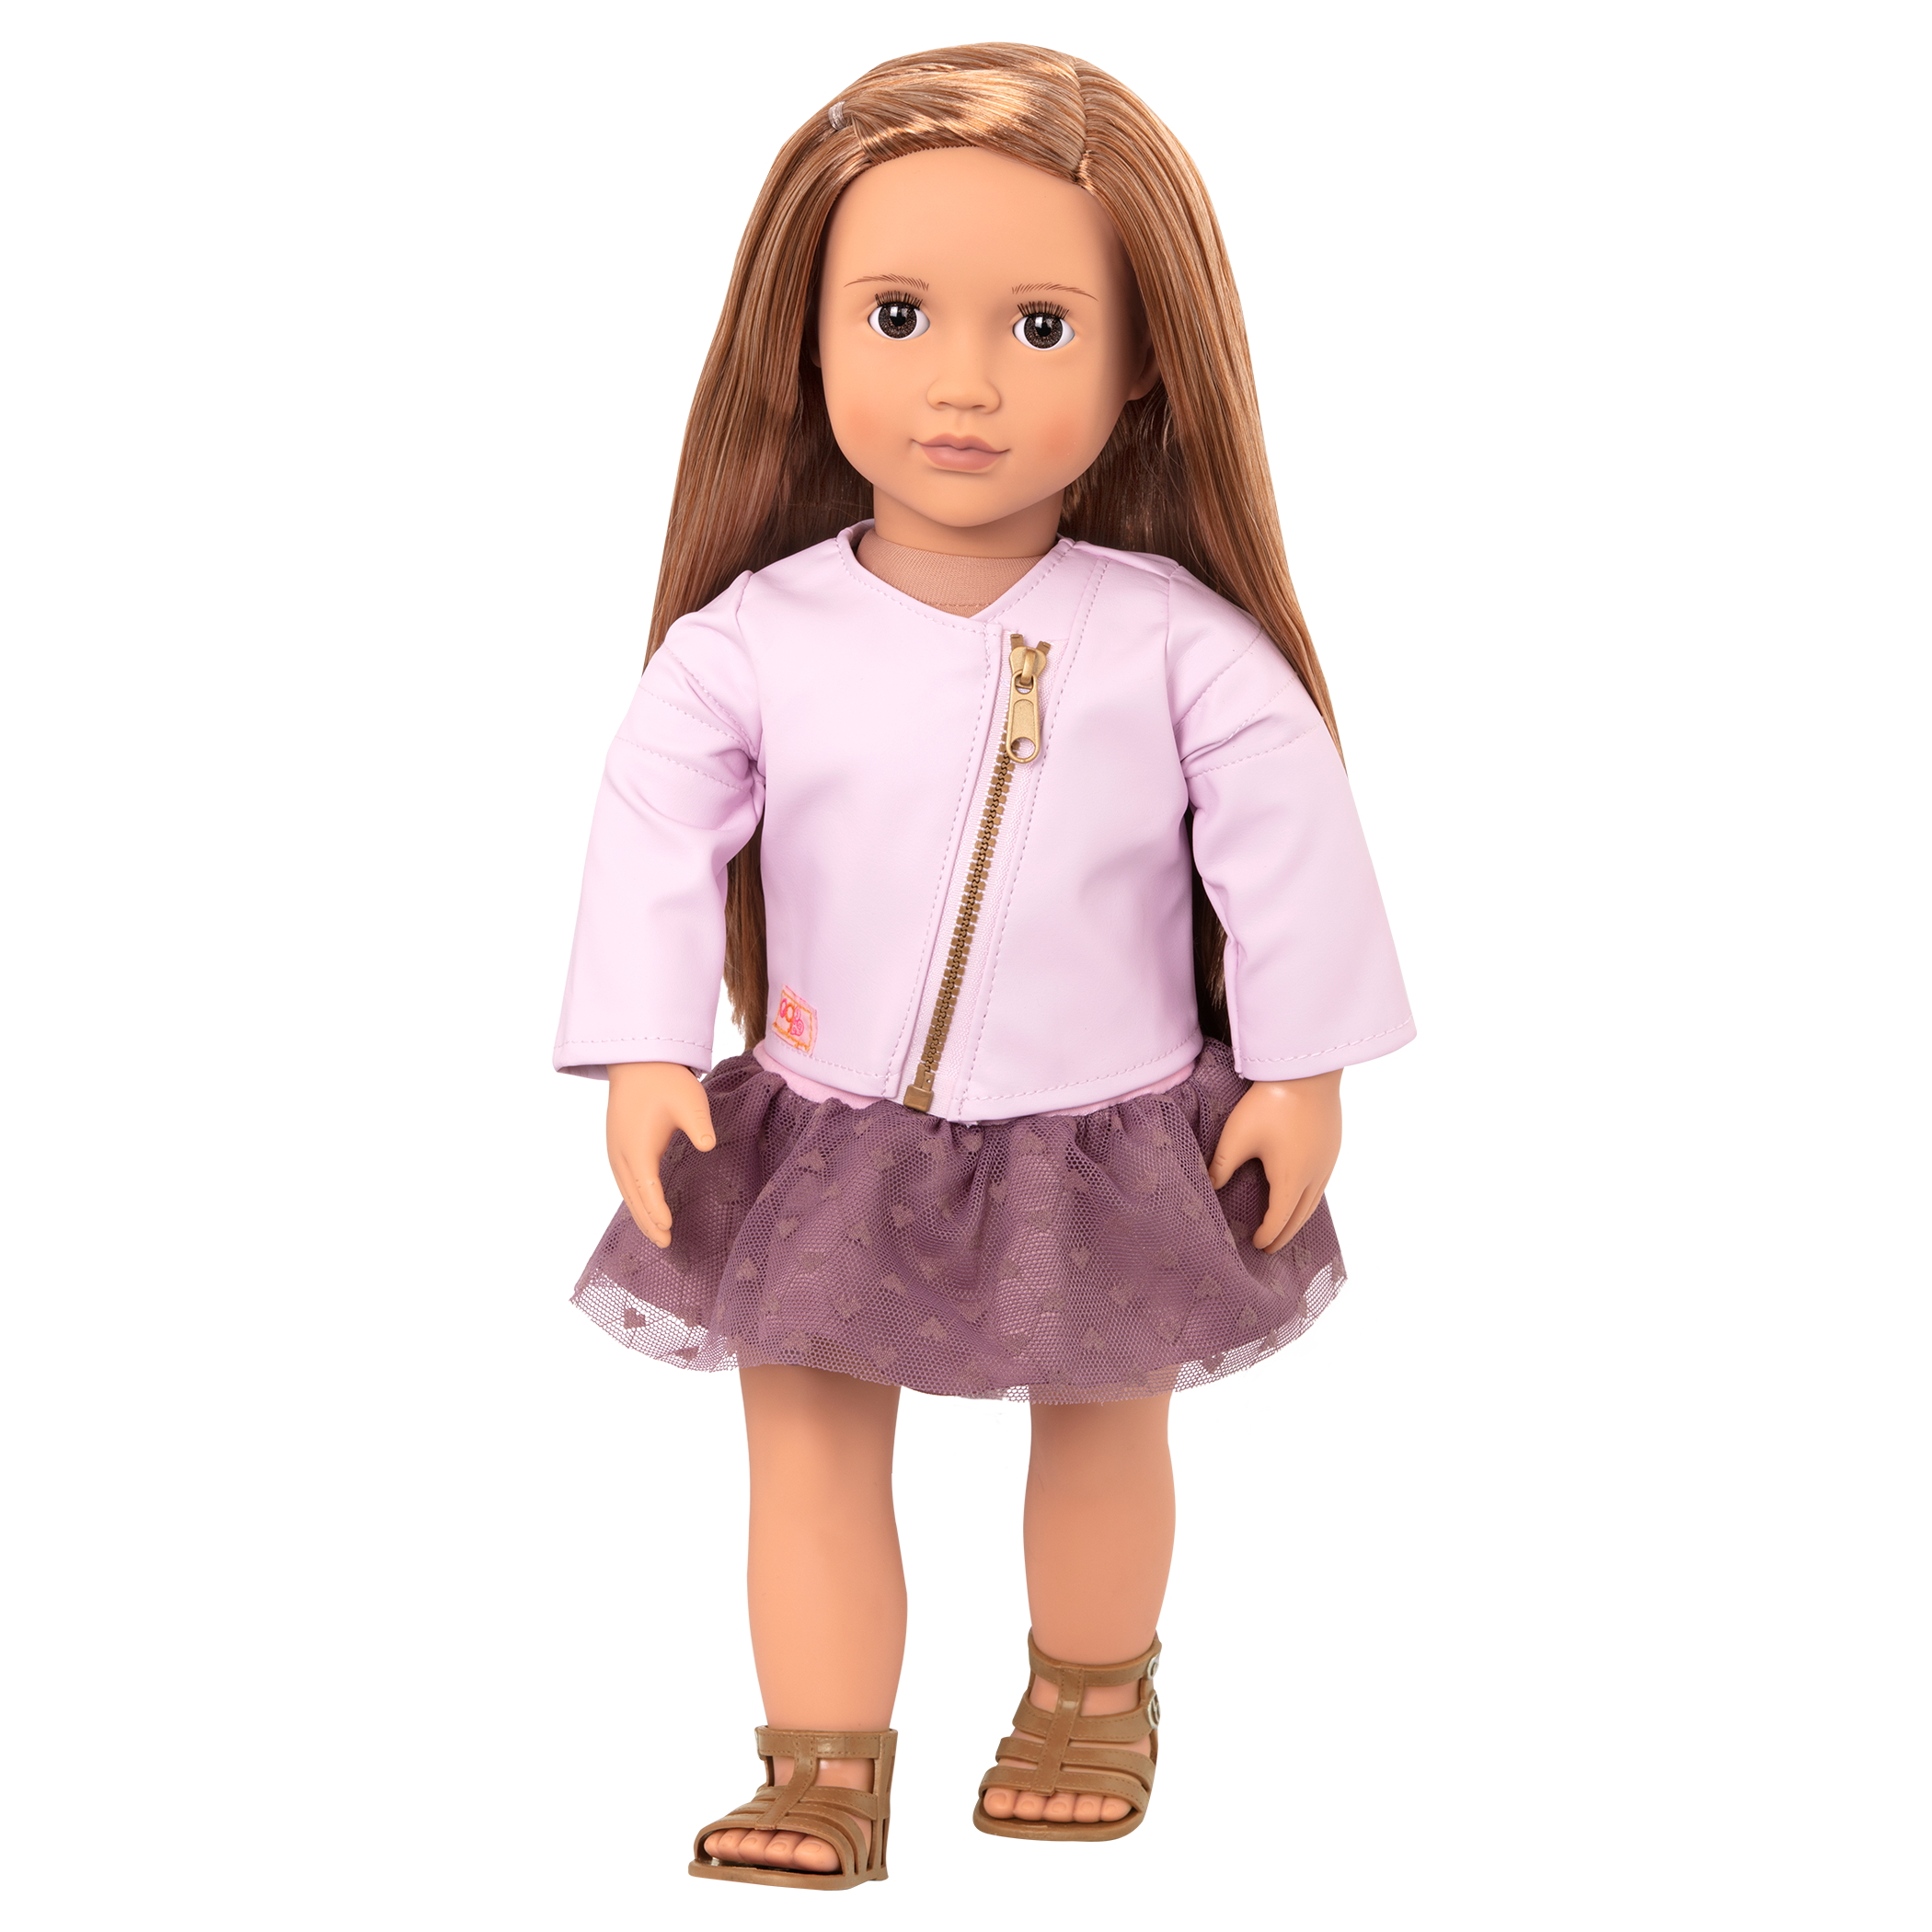 18-inch doll with light-brown hair and brown eyes